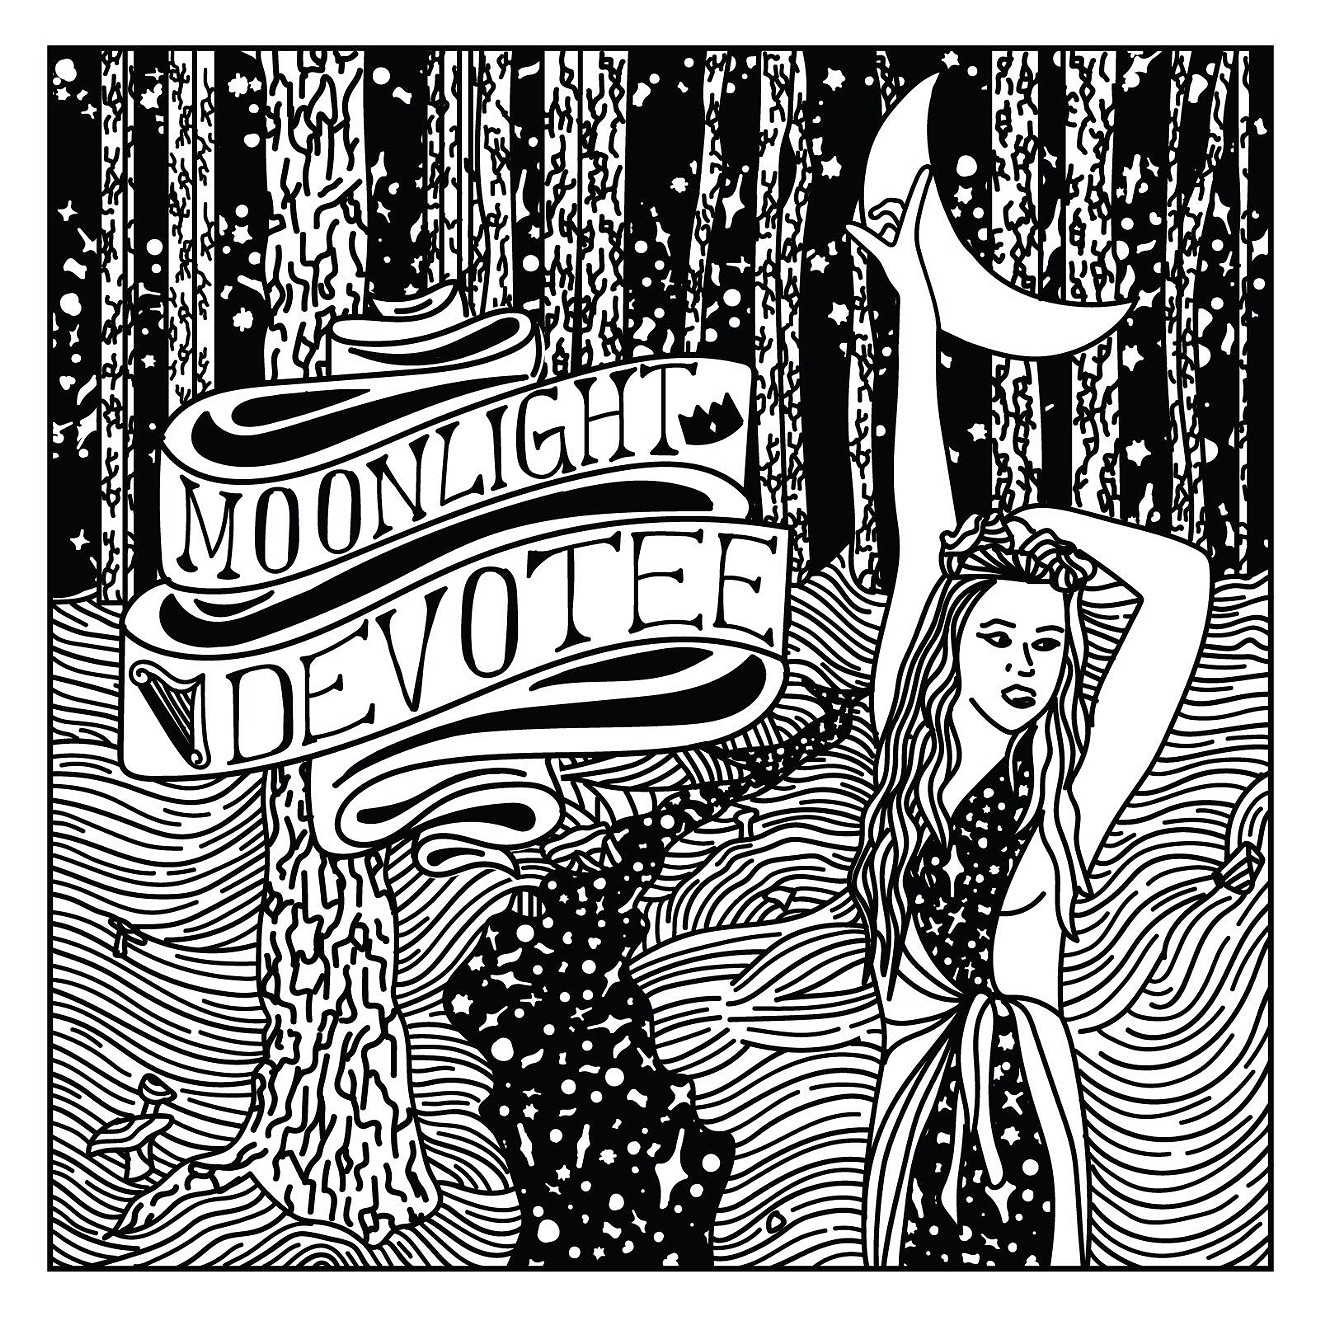 Spencer Wharton's new album, Moonlight Devotee, features a song dedicated to Crown and Harp.